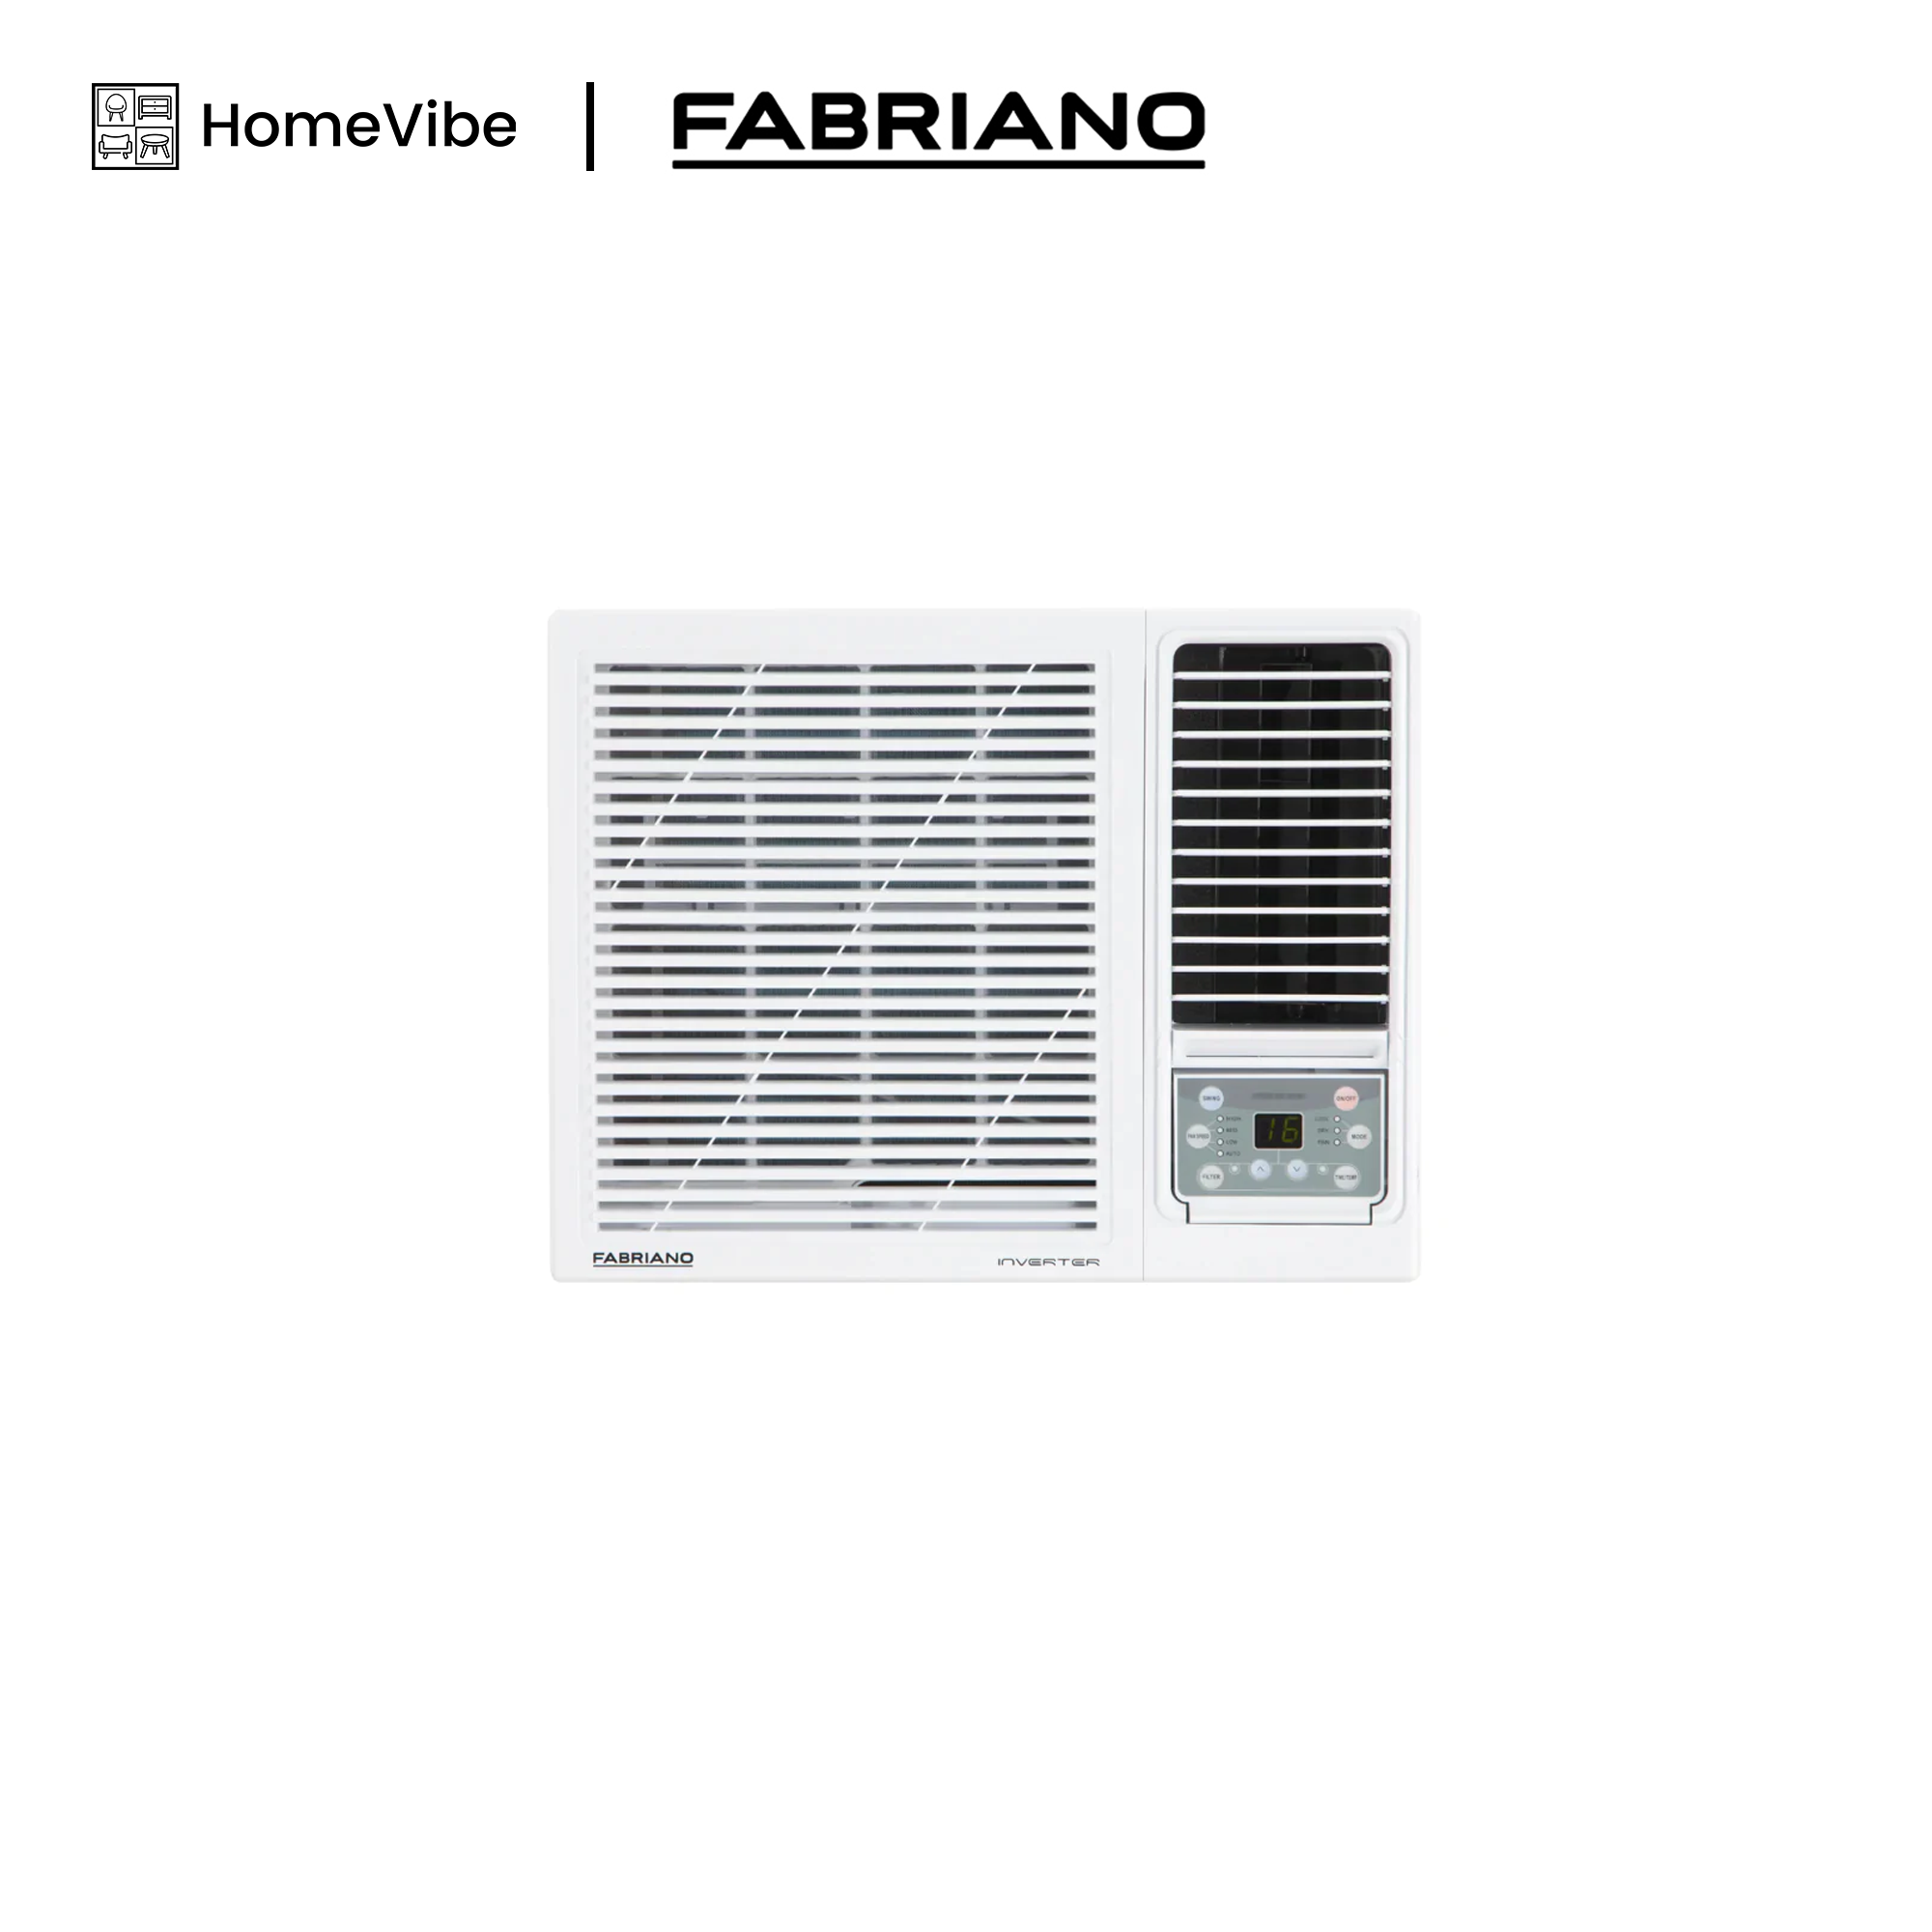 Fabriano 1hp Digital Control INVERTER Compact Window Type Air Conditioner FWE09GWIC